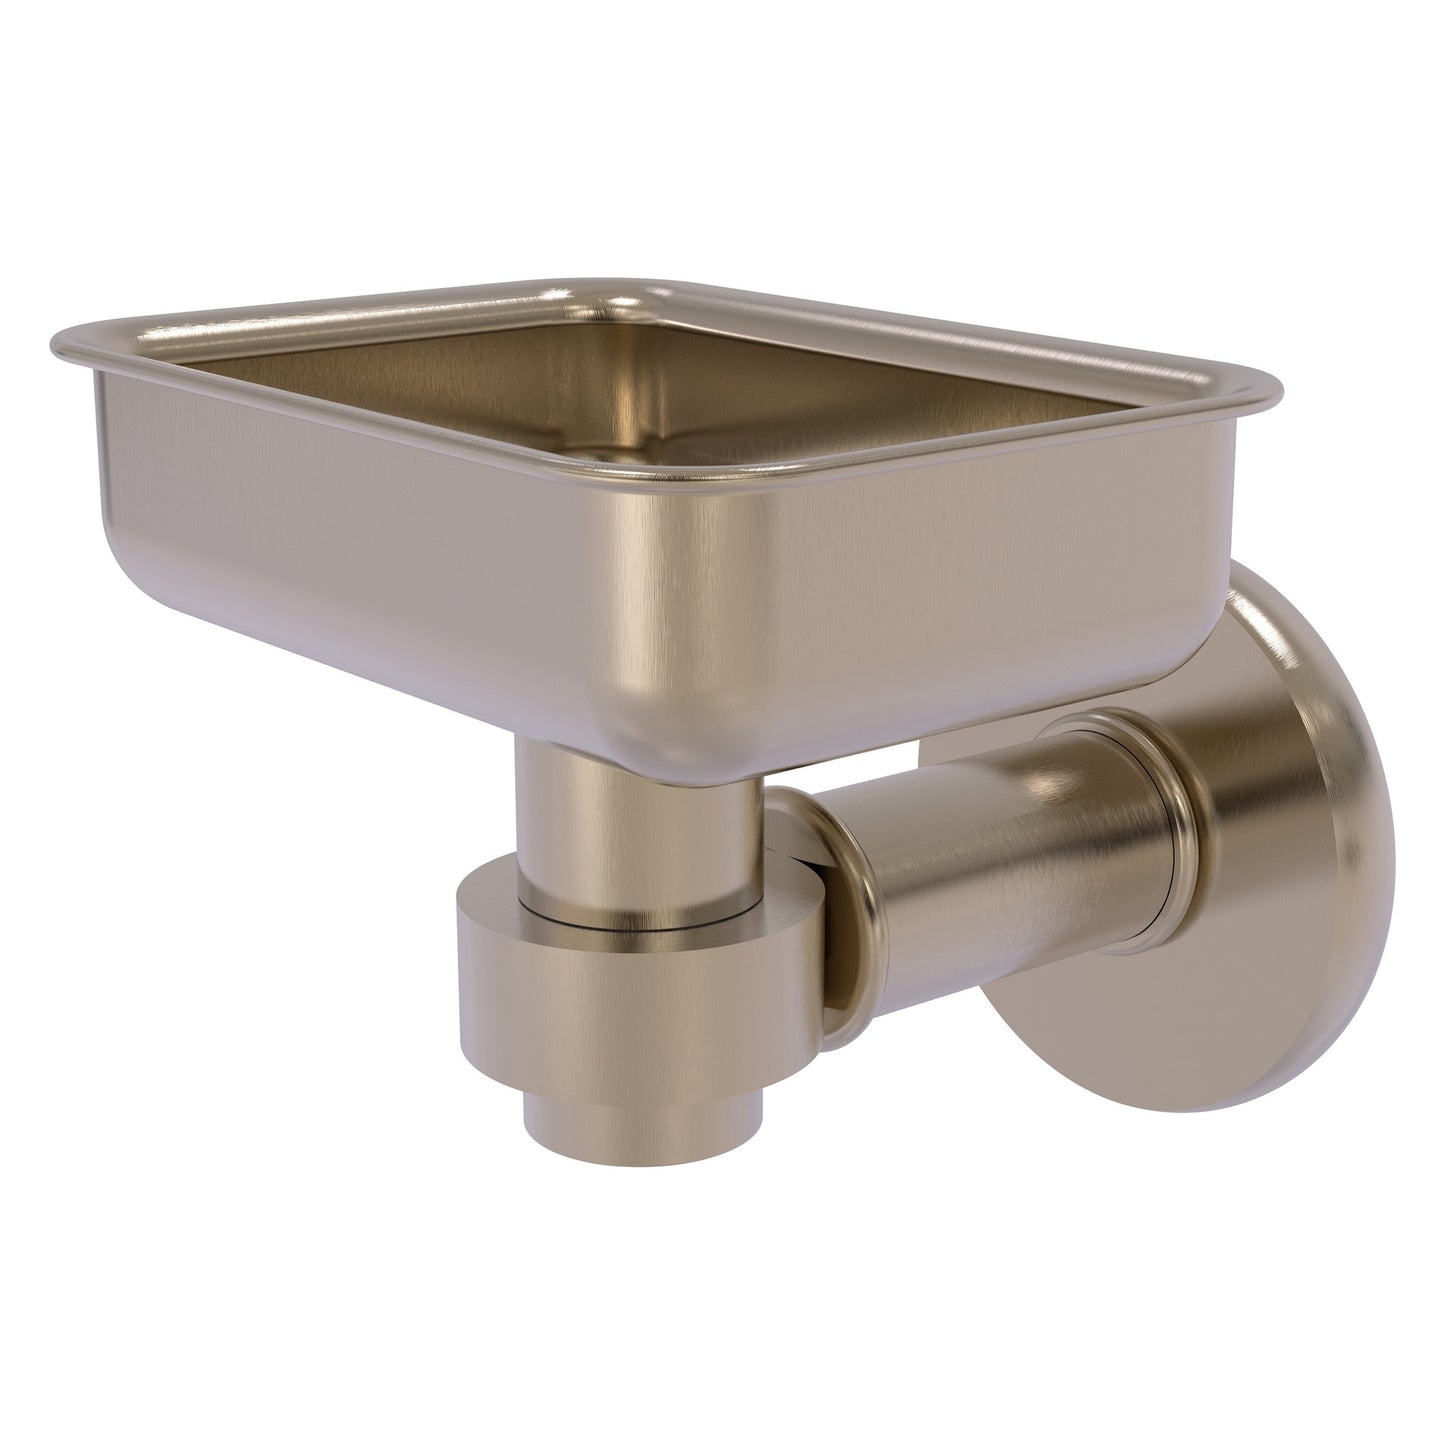 Allied Brass Continental 4.5" x 3.5" Antique Pewter Solid Brass Wall-Mounted Soap Dish Holder